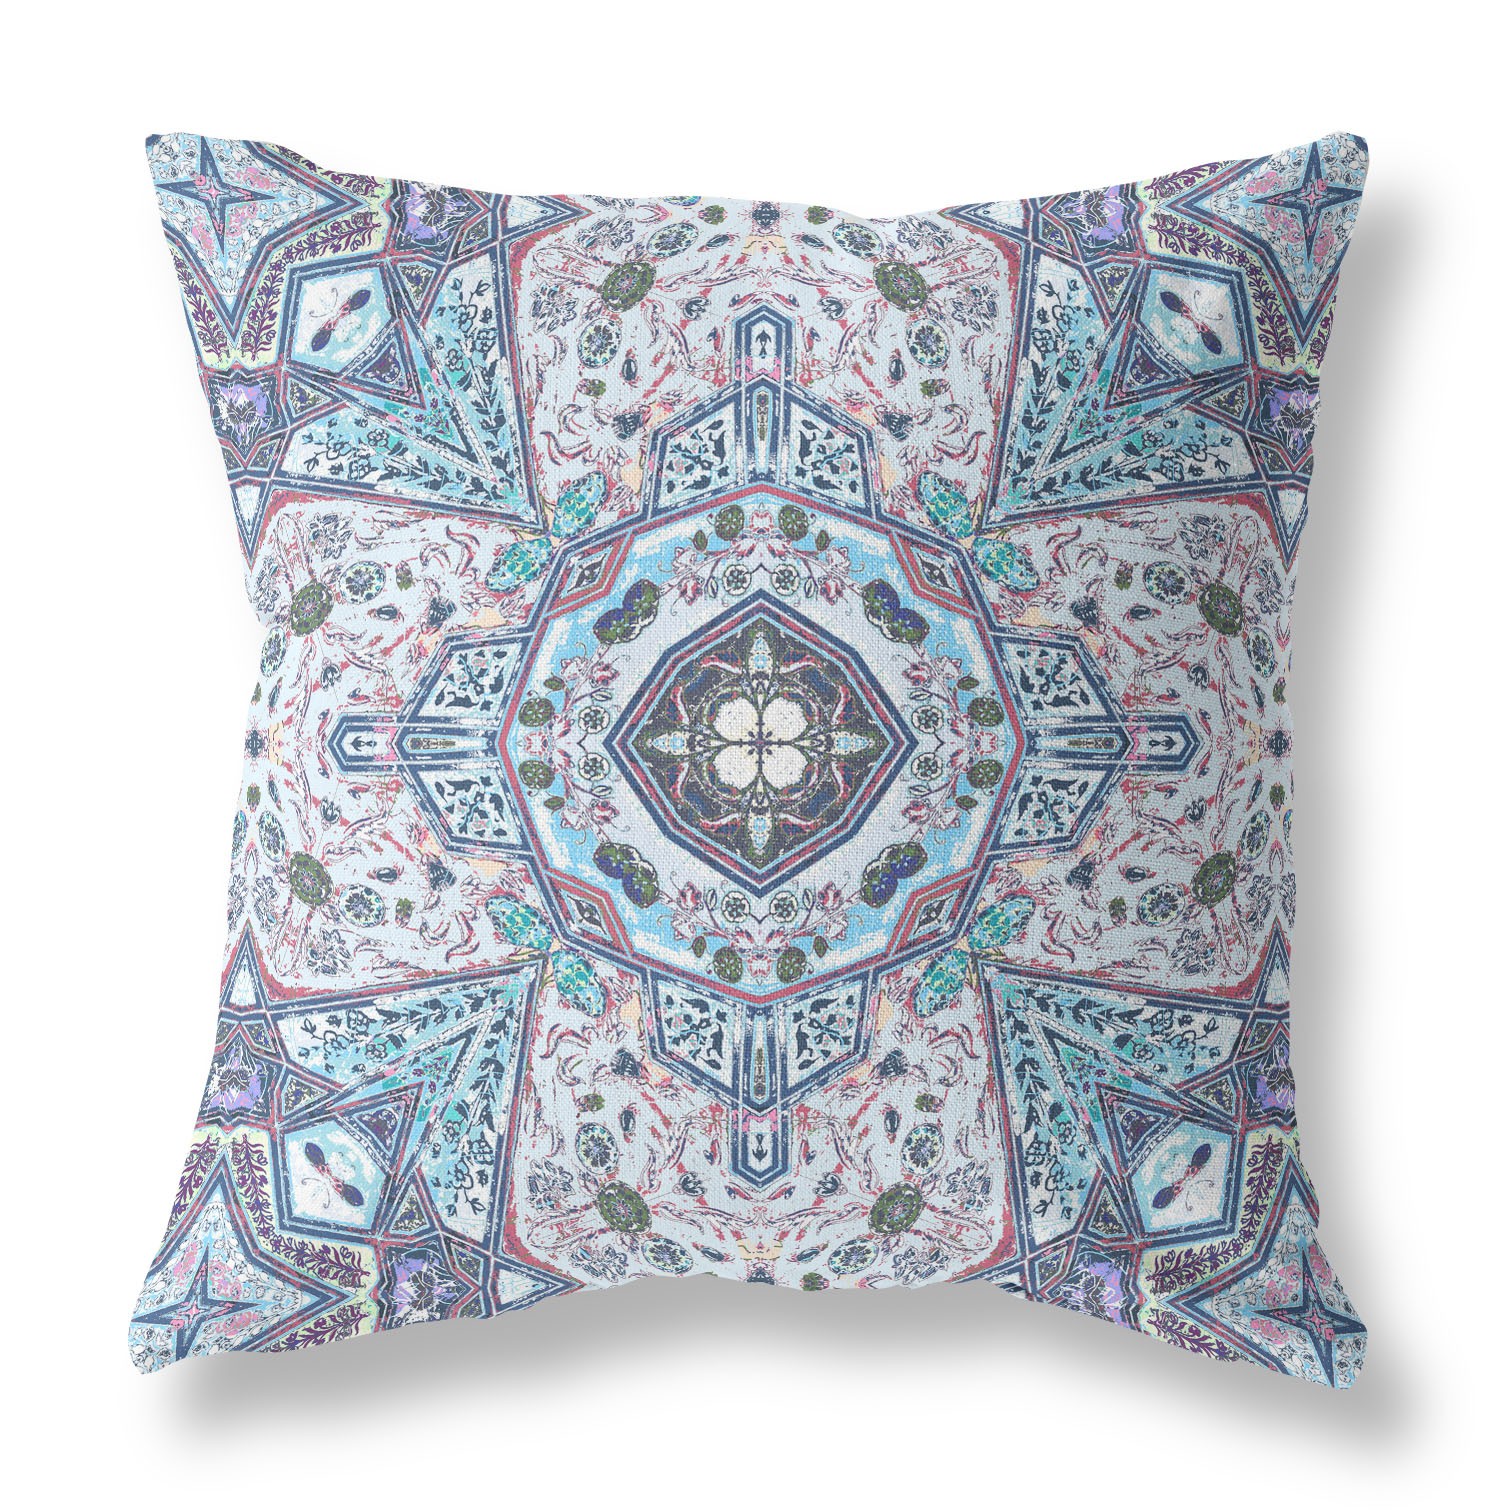 28" X 28" Blue And Gray Blown Seam Geometric Indoor Outdoor Throw Pillow Cover & Insert-418016-1